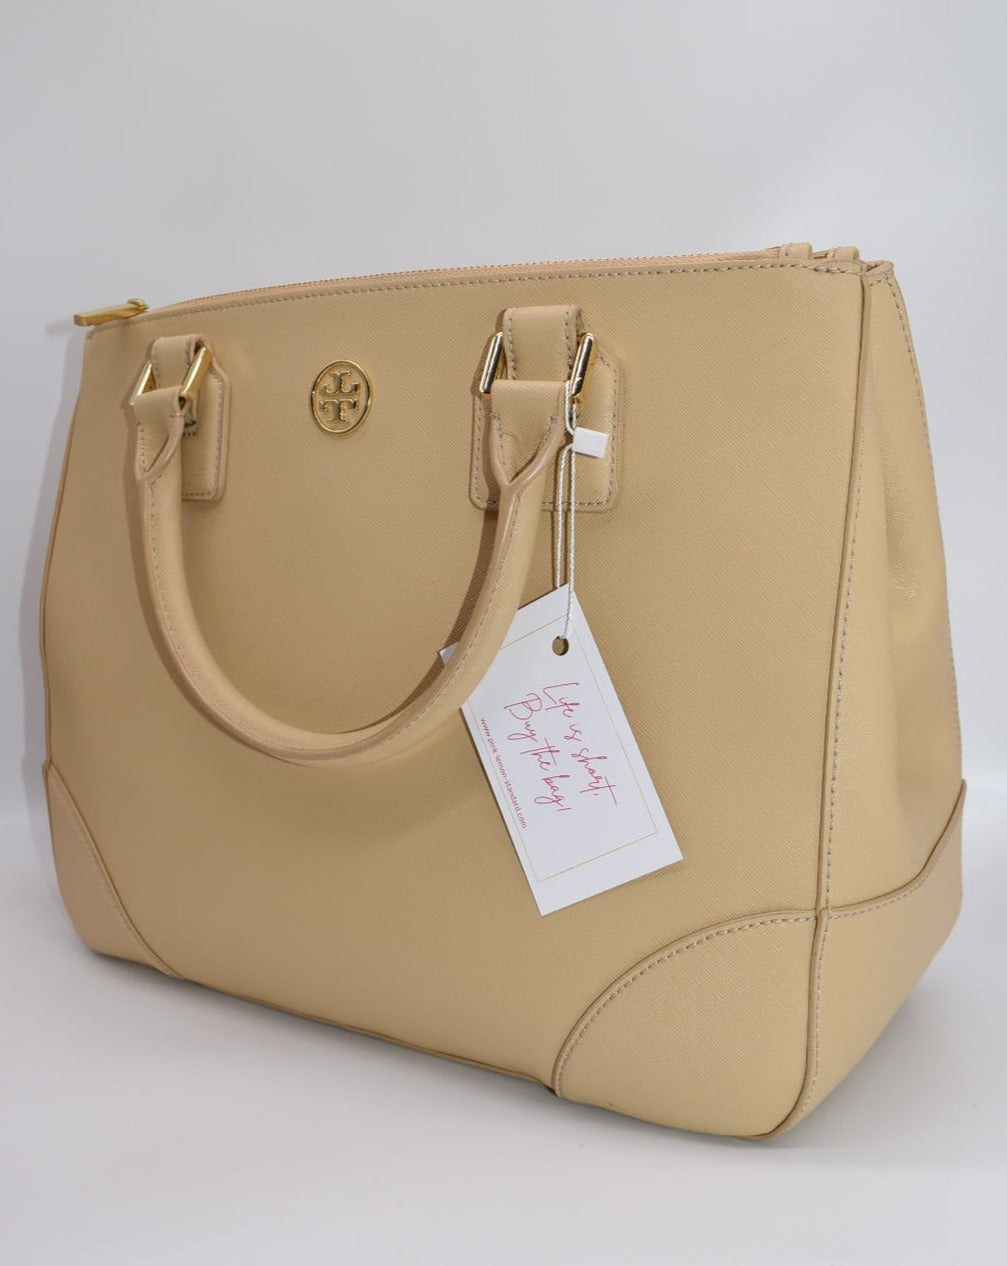 Tory Burch Robinson Double Zip Tote Bag in Sand